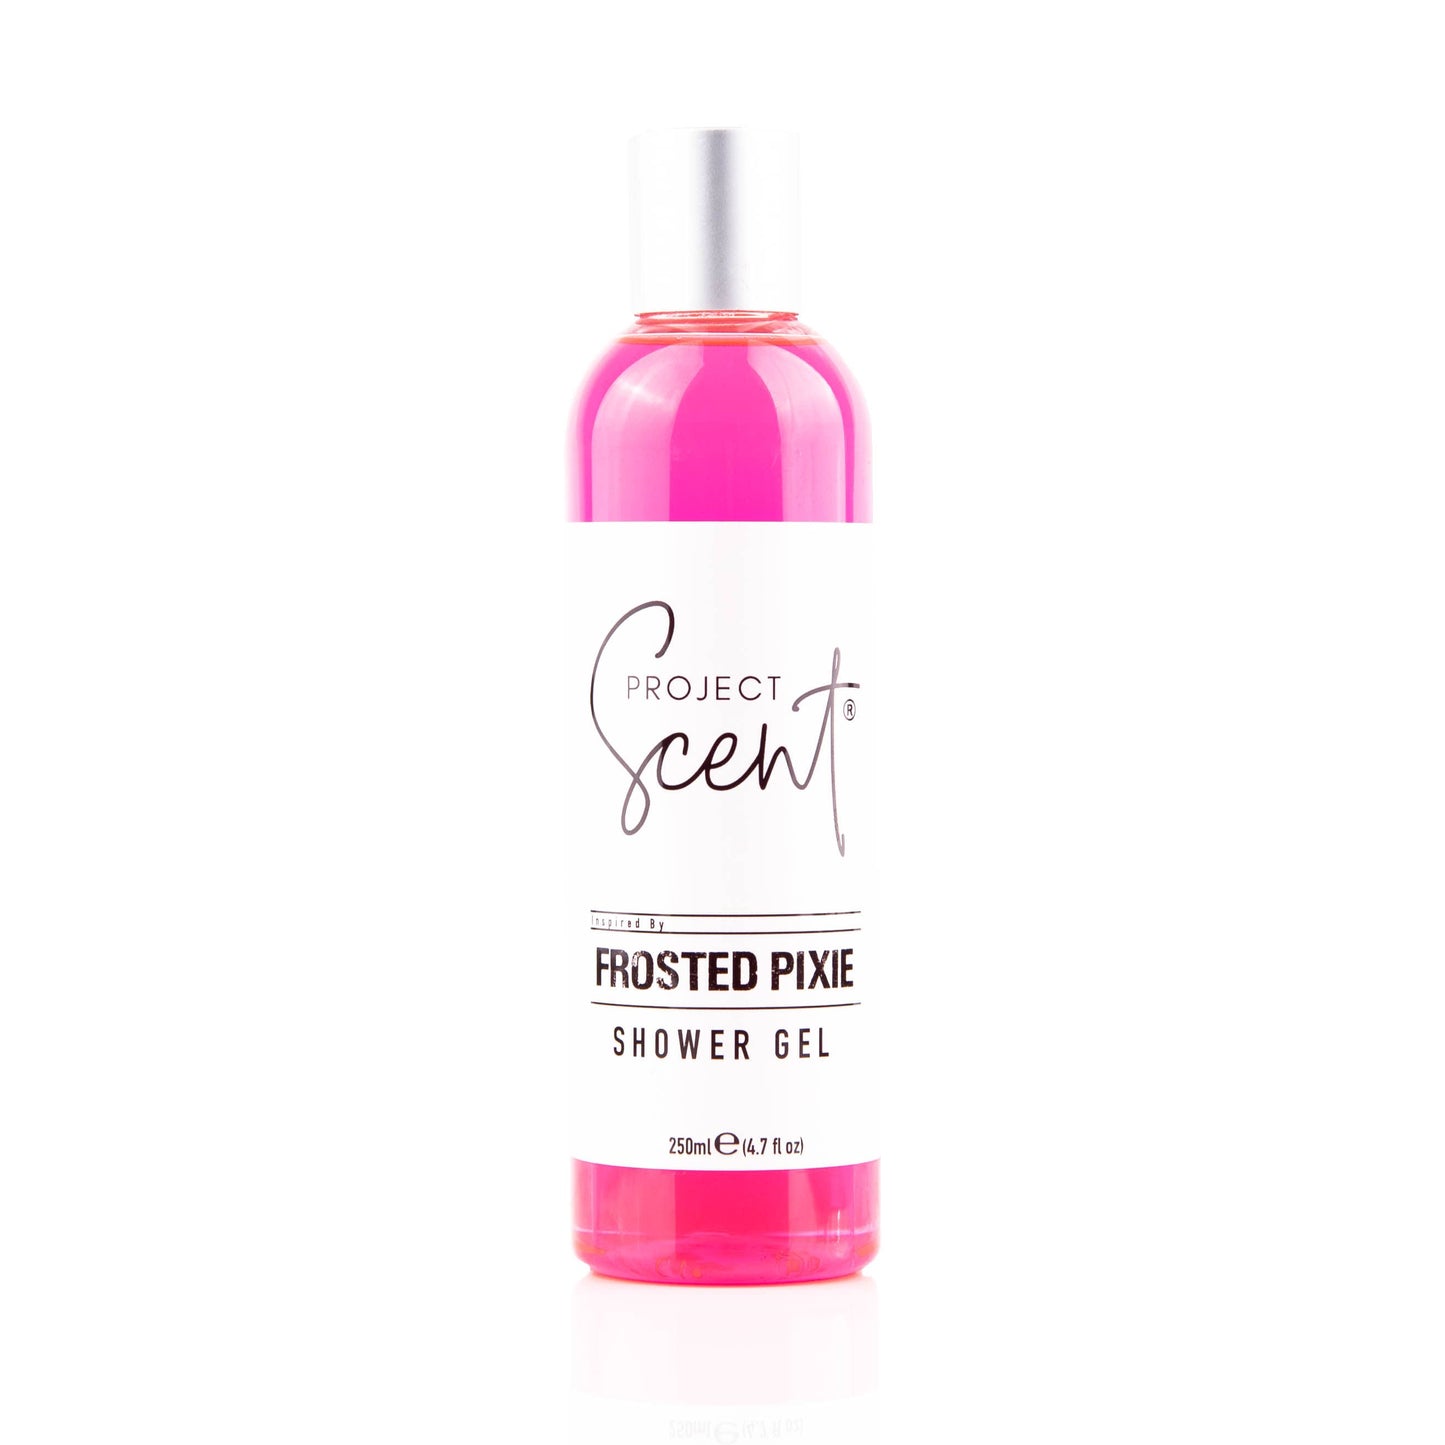 Project Scent Frosted Pixie (Snow) Shower Gel 150ml & 250ml